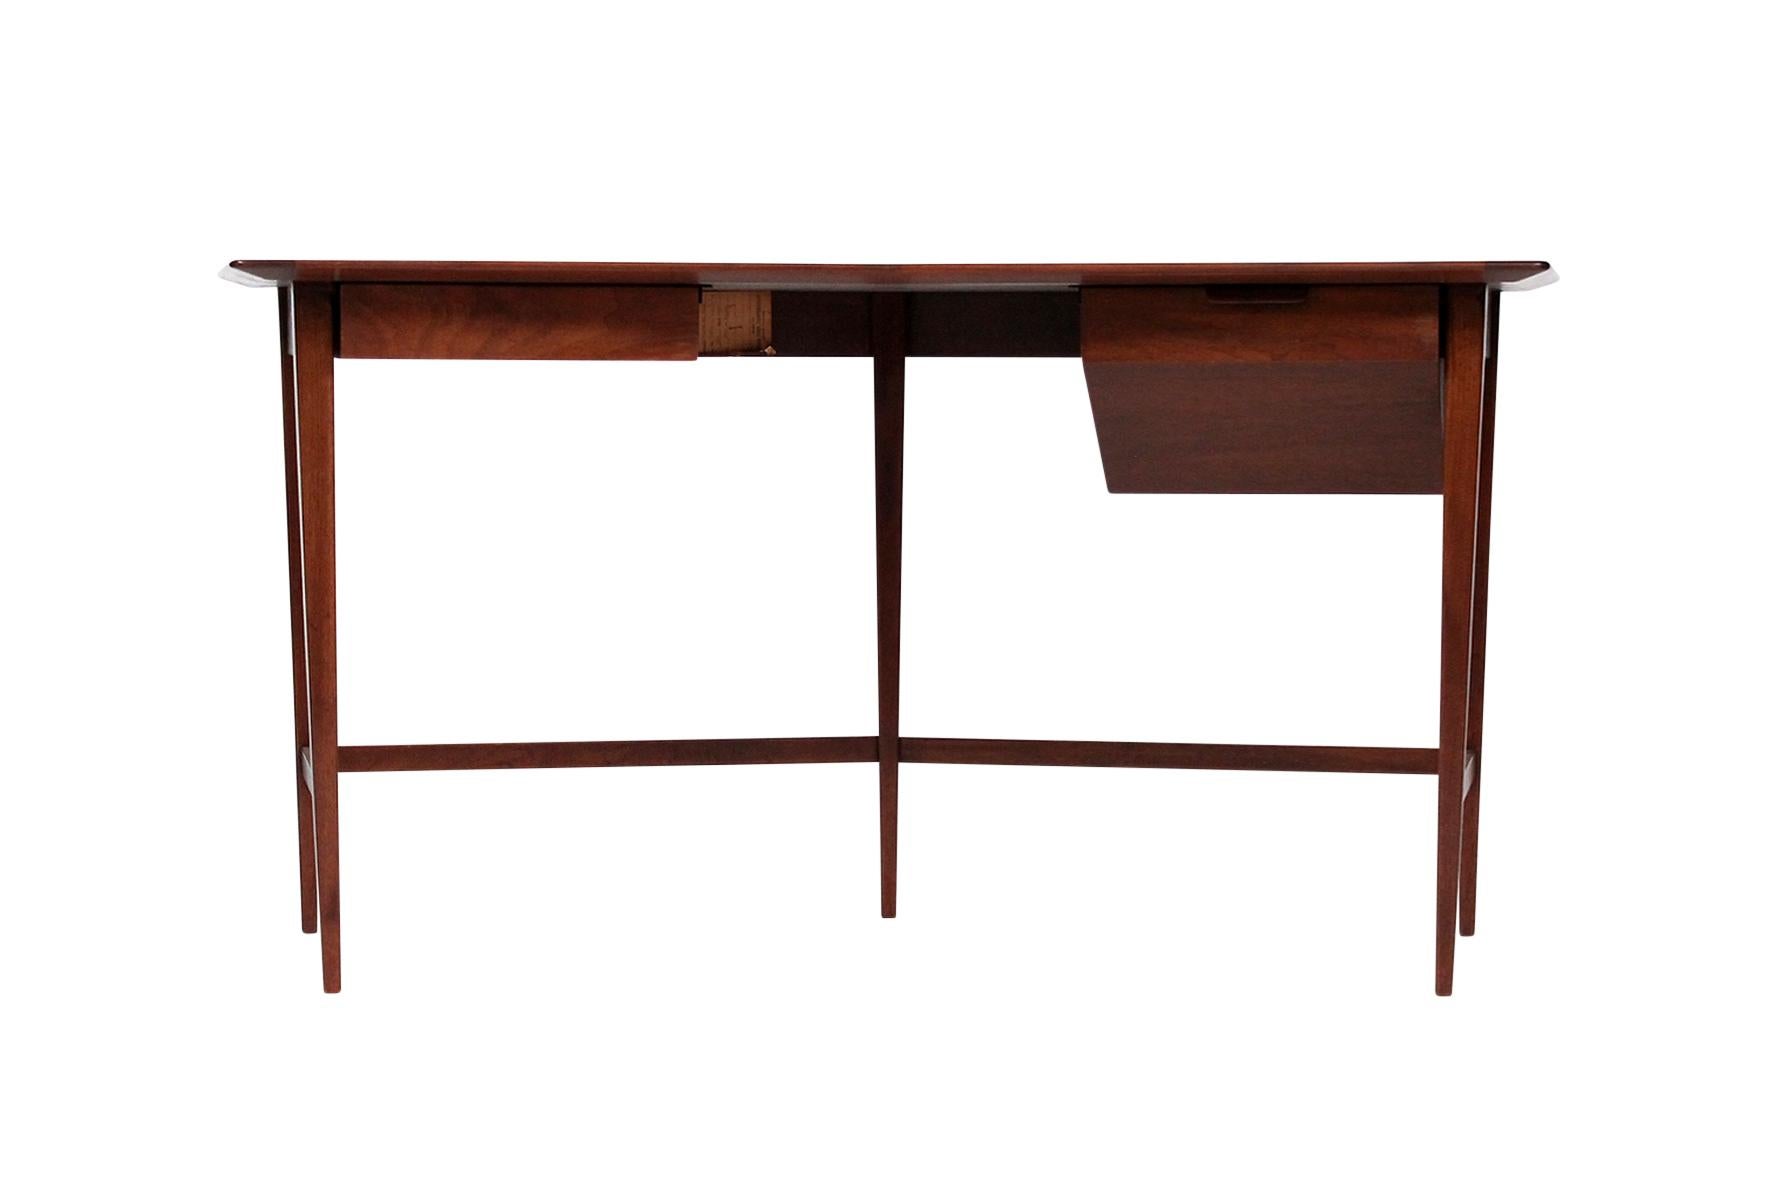 Rarely seen and delicately designed Edward Wormley for Dunbar desk in walnut.